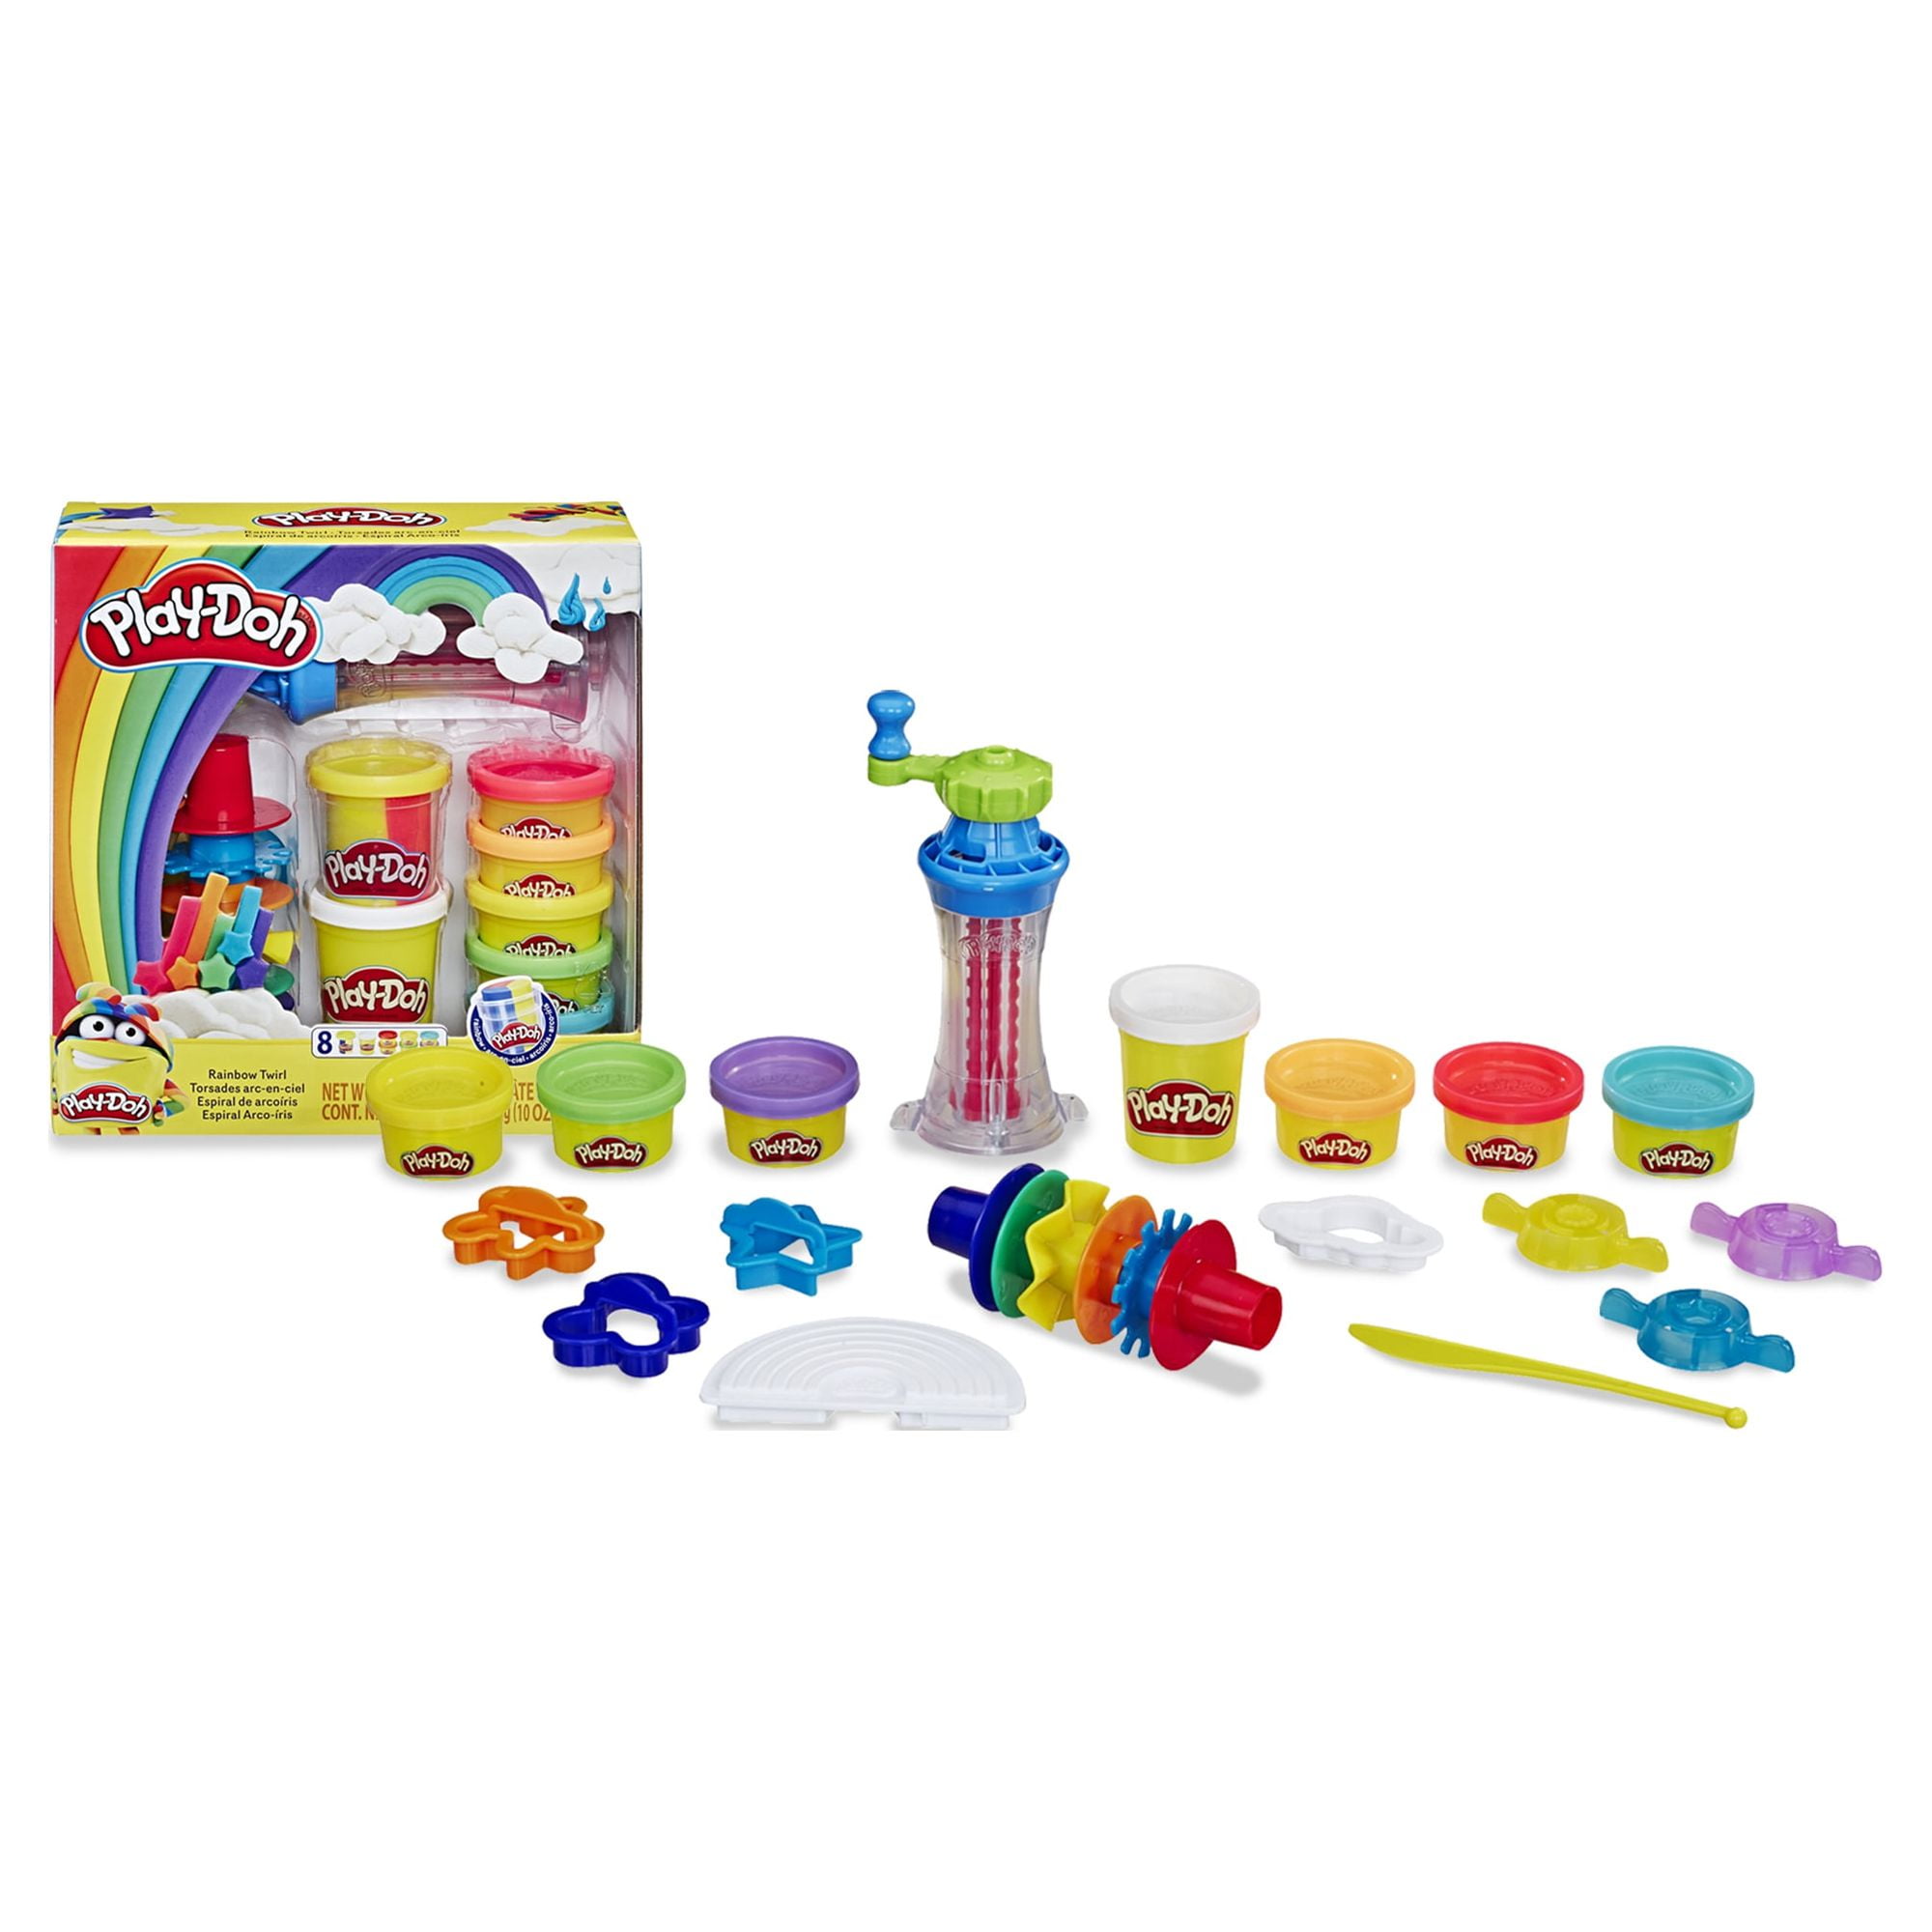 Play-Doh 8-Pack Rainbow Non-Toxic Modeling Compound with 8 Colors - Play-Doh